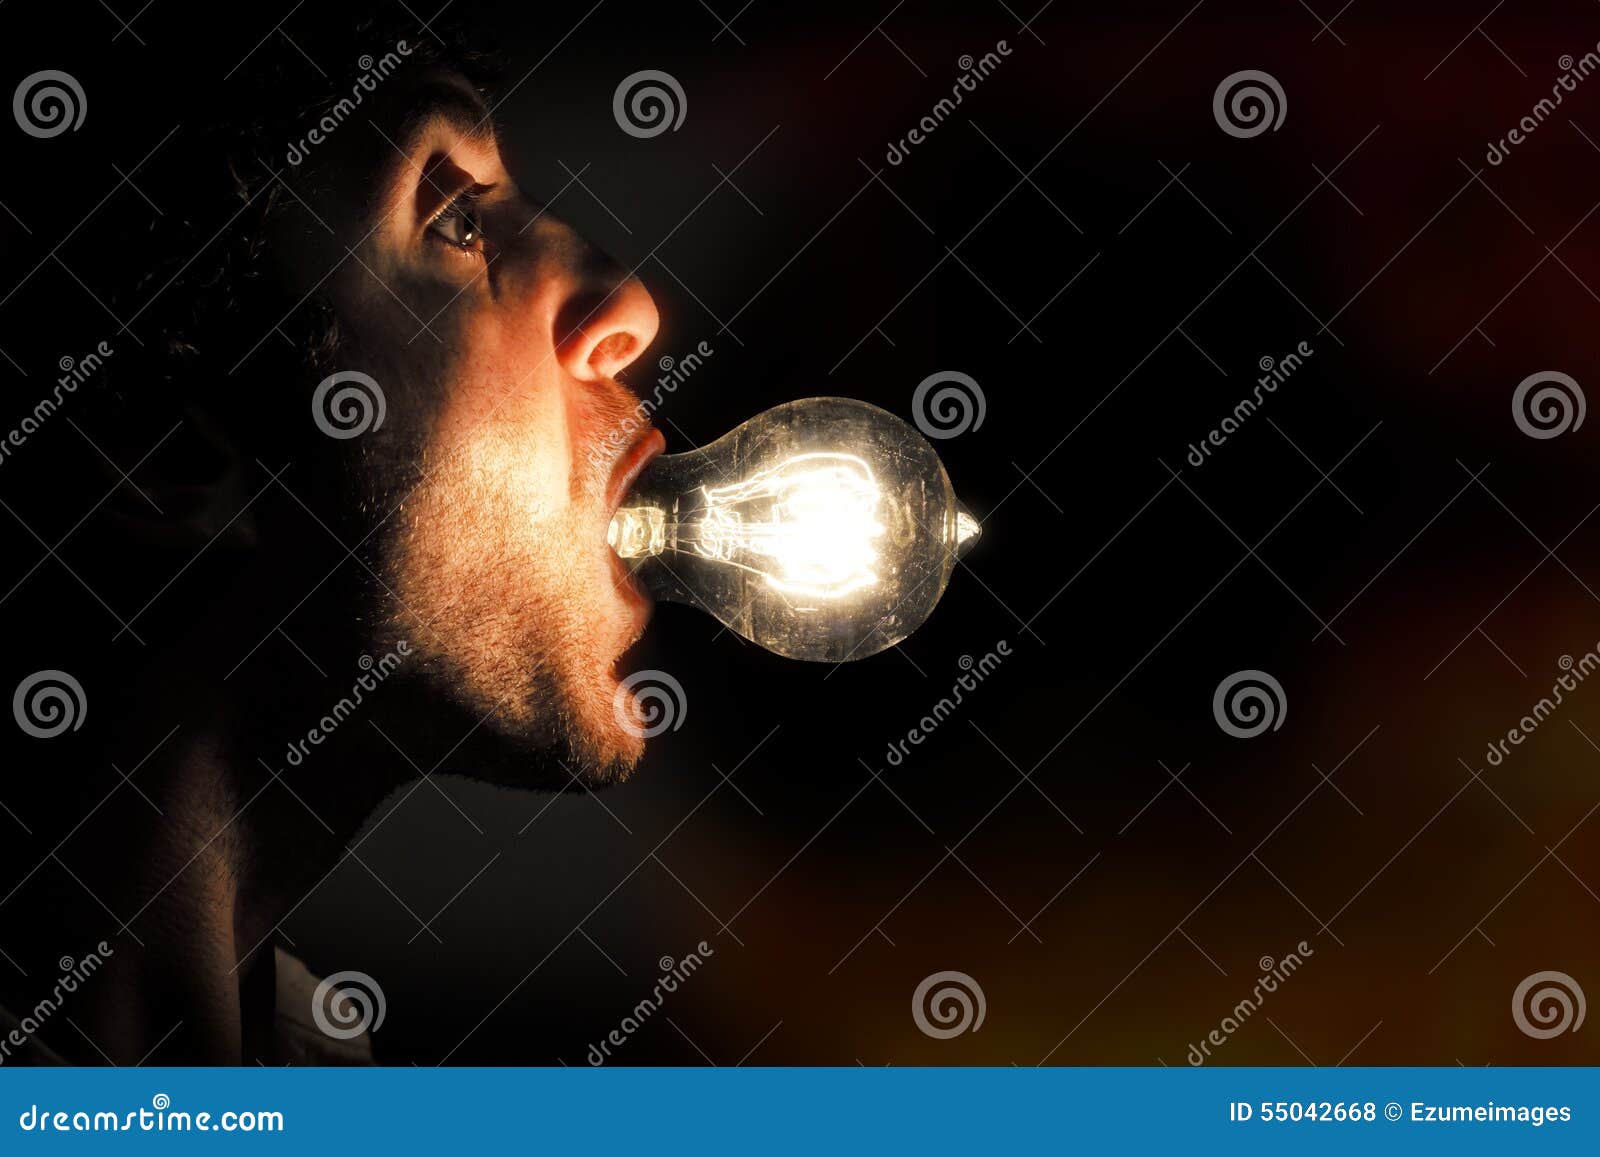 603 Light Bulb Mouth Stock Photos - Free Stock Photos from